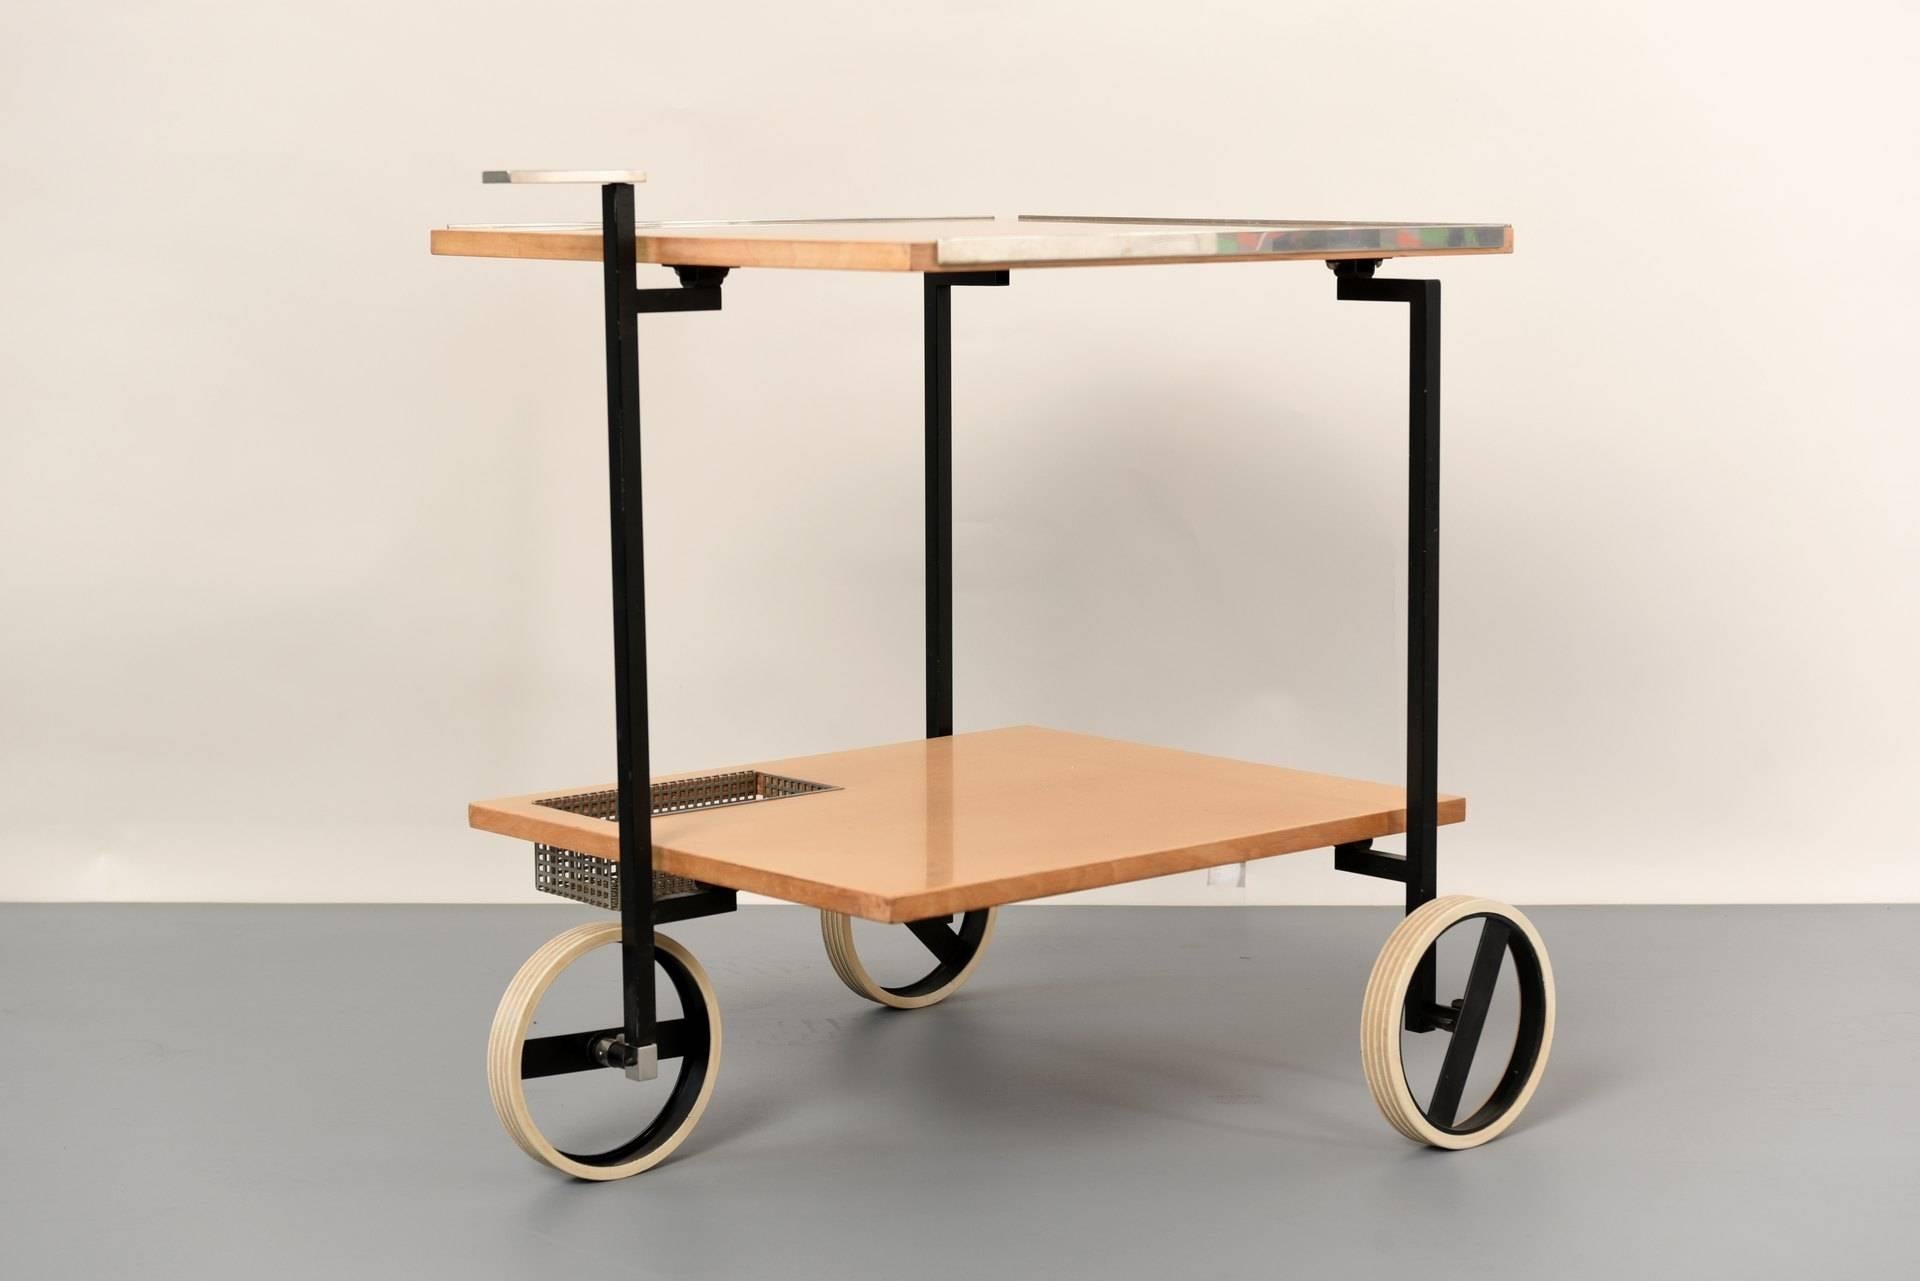 The front wheel can be steered by means of a double rod on the chromed handle. This sensible and elegant patent of the Rudolf Rochelt Werkstätten allows the bar cart with only three wheels, light and transparent, to find maneuverable space even in